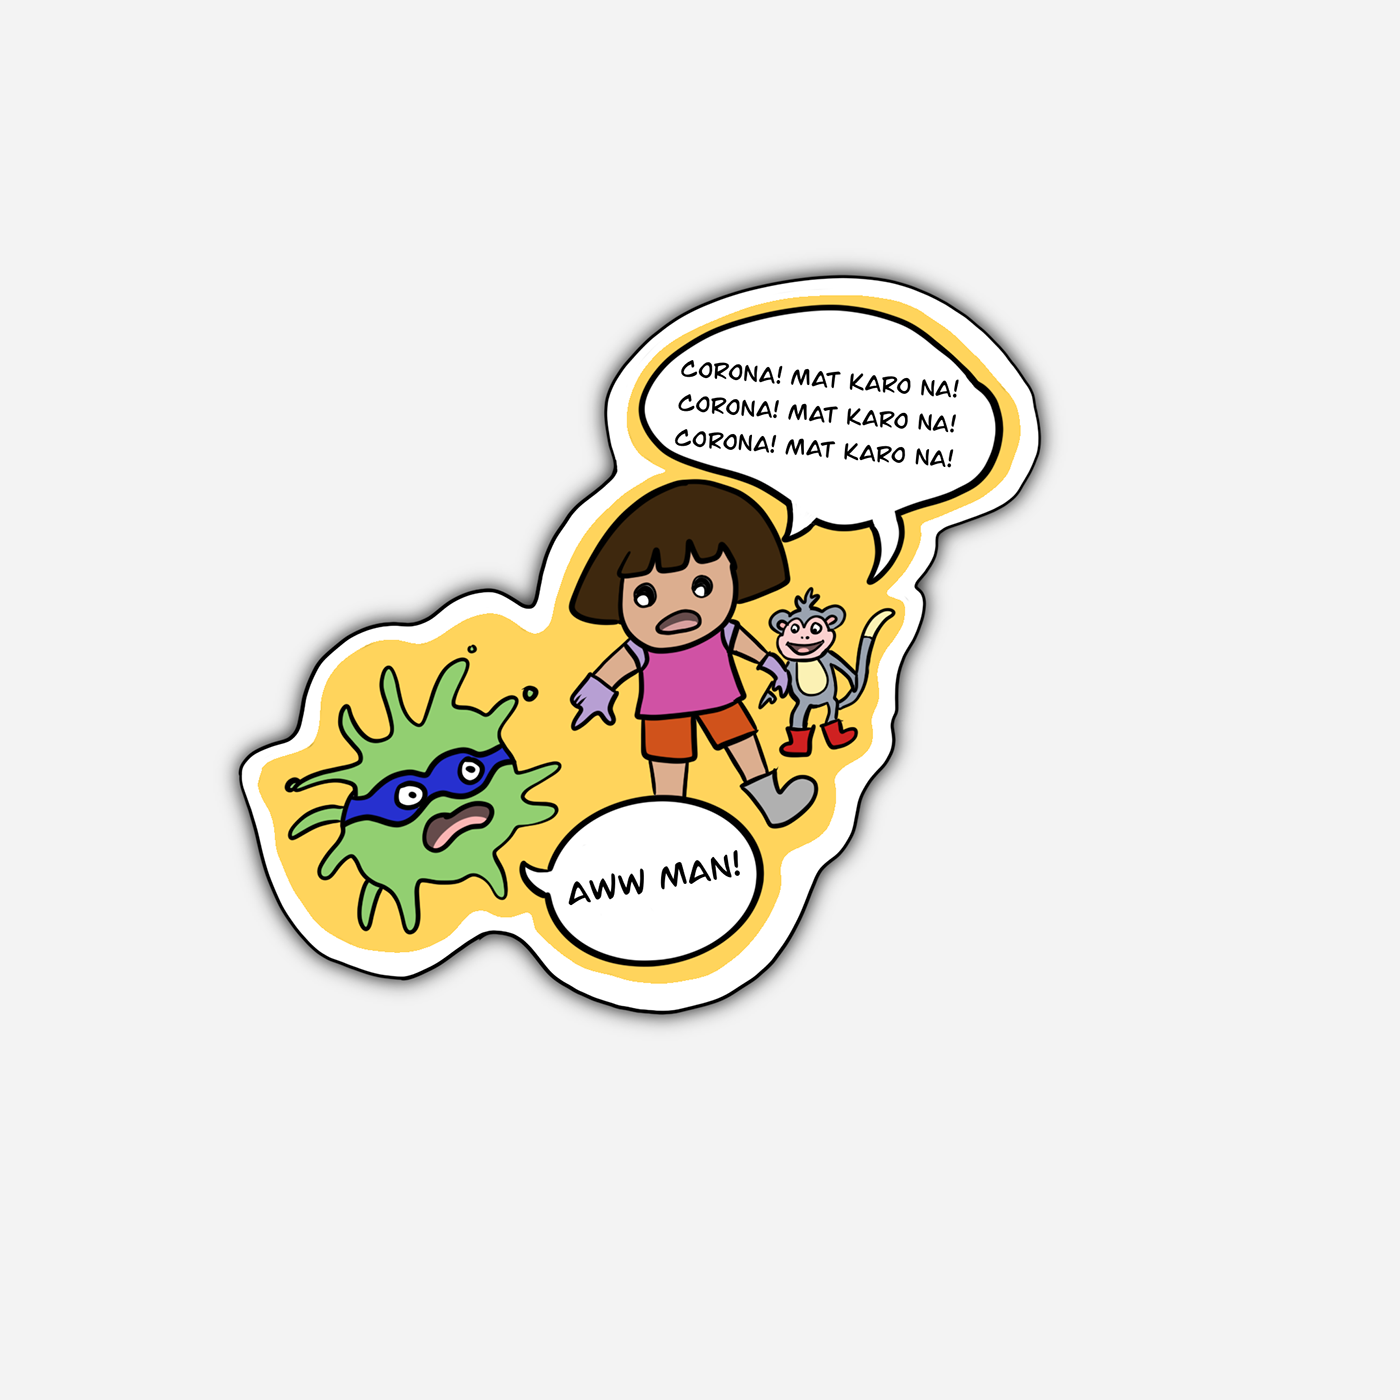 coronaawareness COVID19 graphicdesign humour illustrations laptopstickers PopCulture pun socialimpact stickers